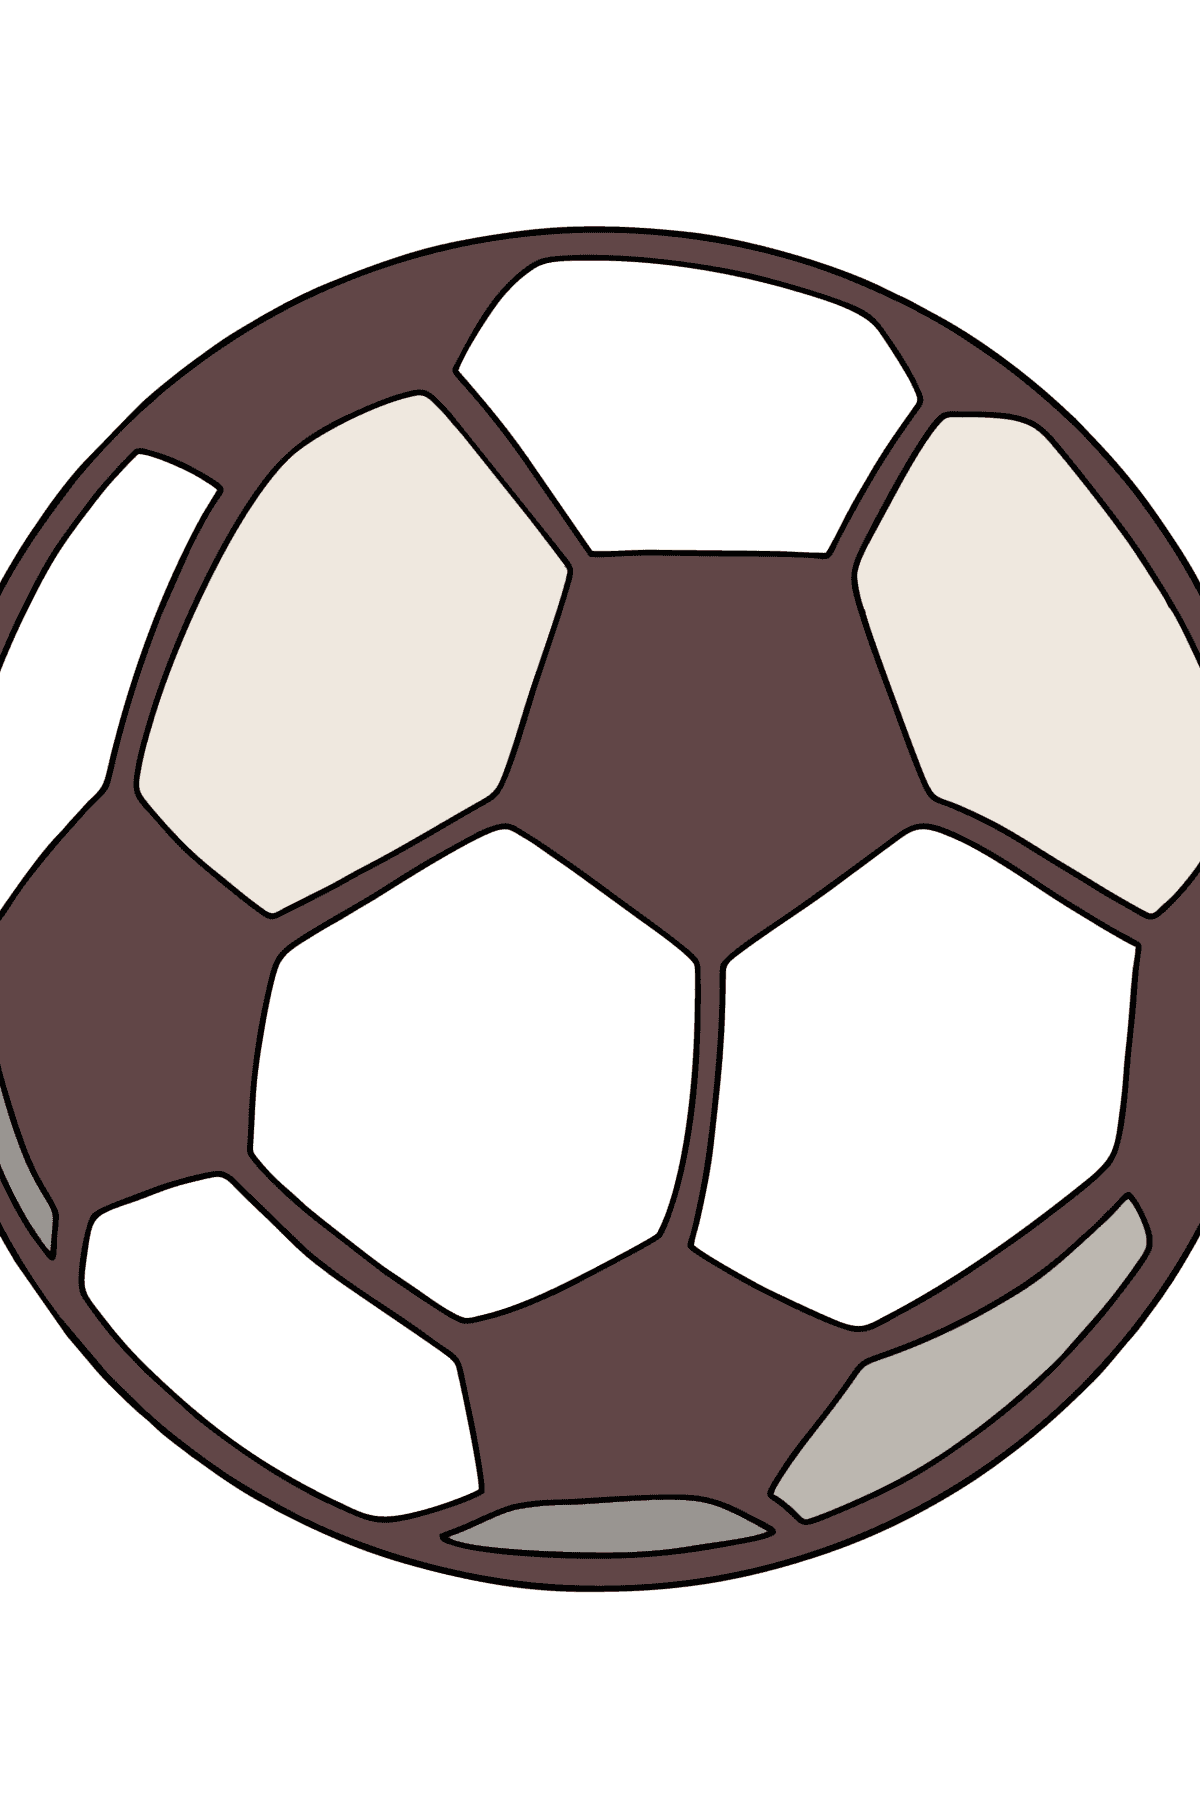 UEFA Ball сoloring page - Coloring Pages for Kids